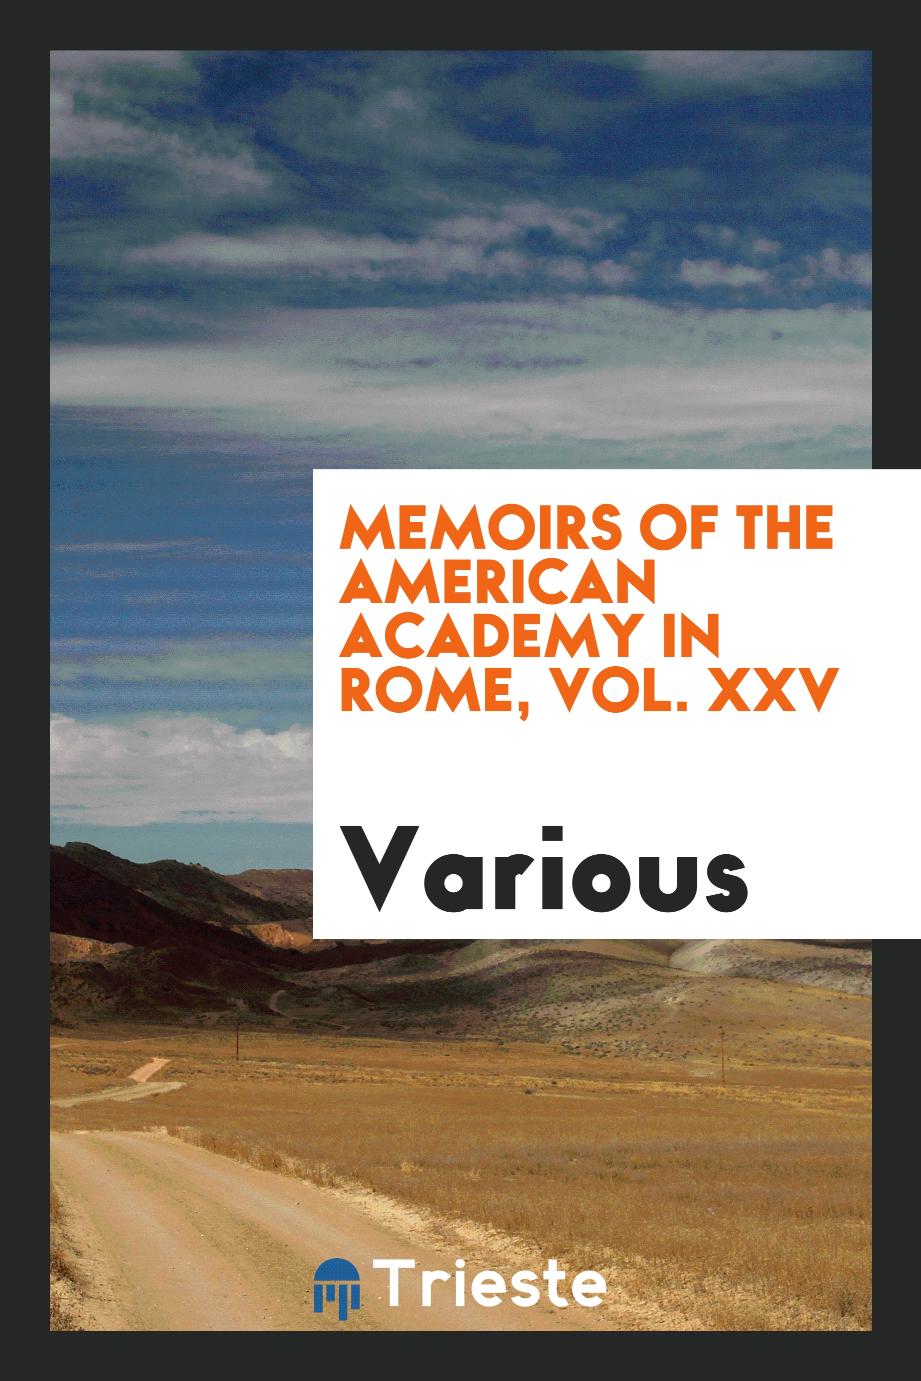 Memoirs of the American Academy in Rome, Vol. XXV